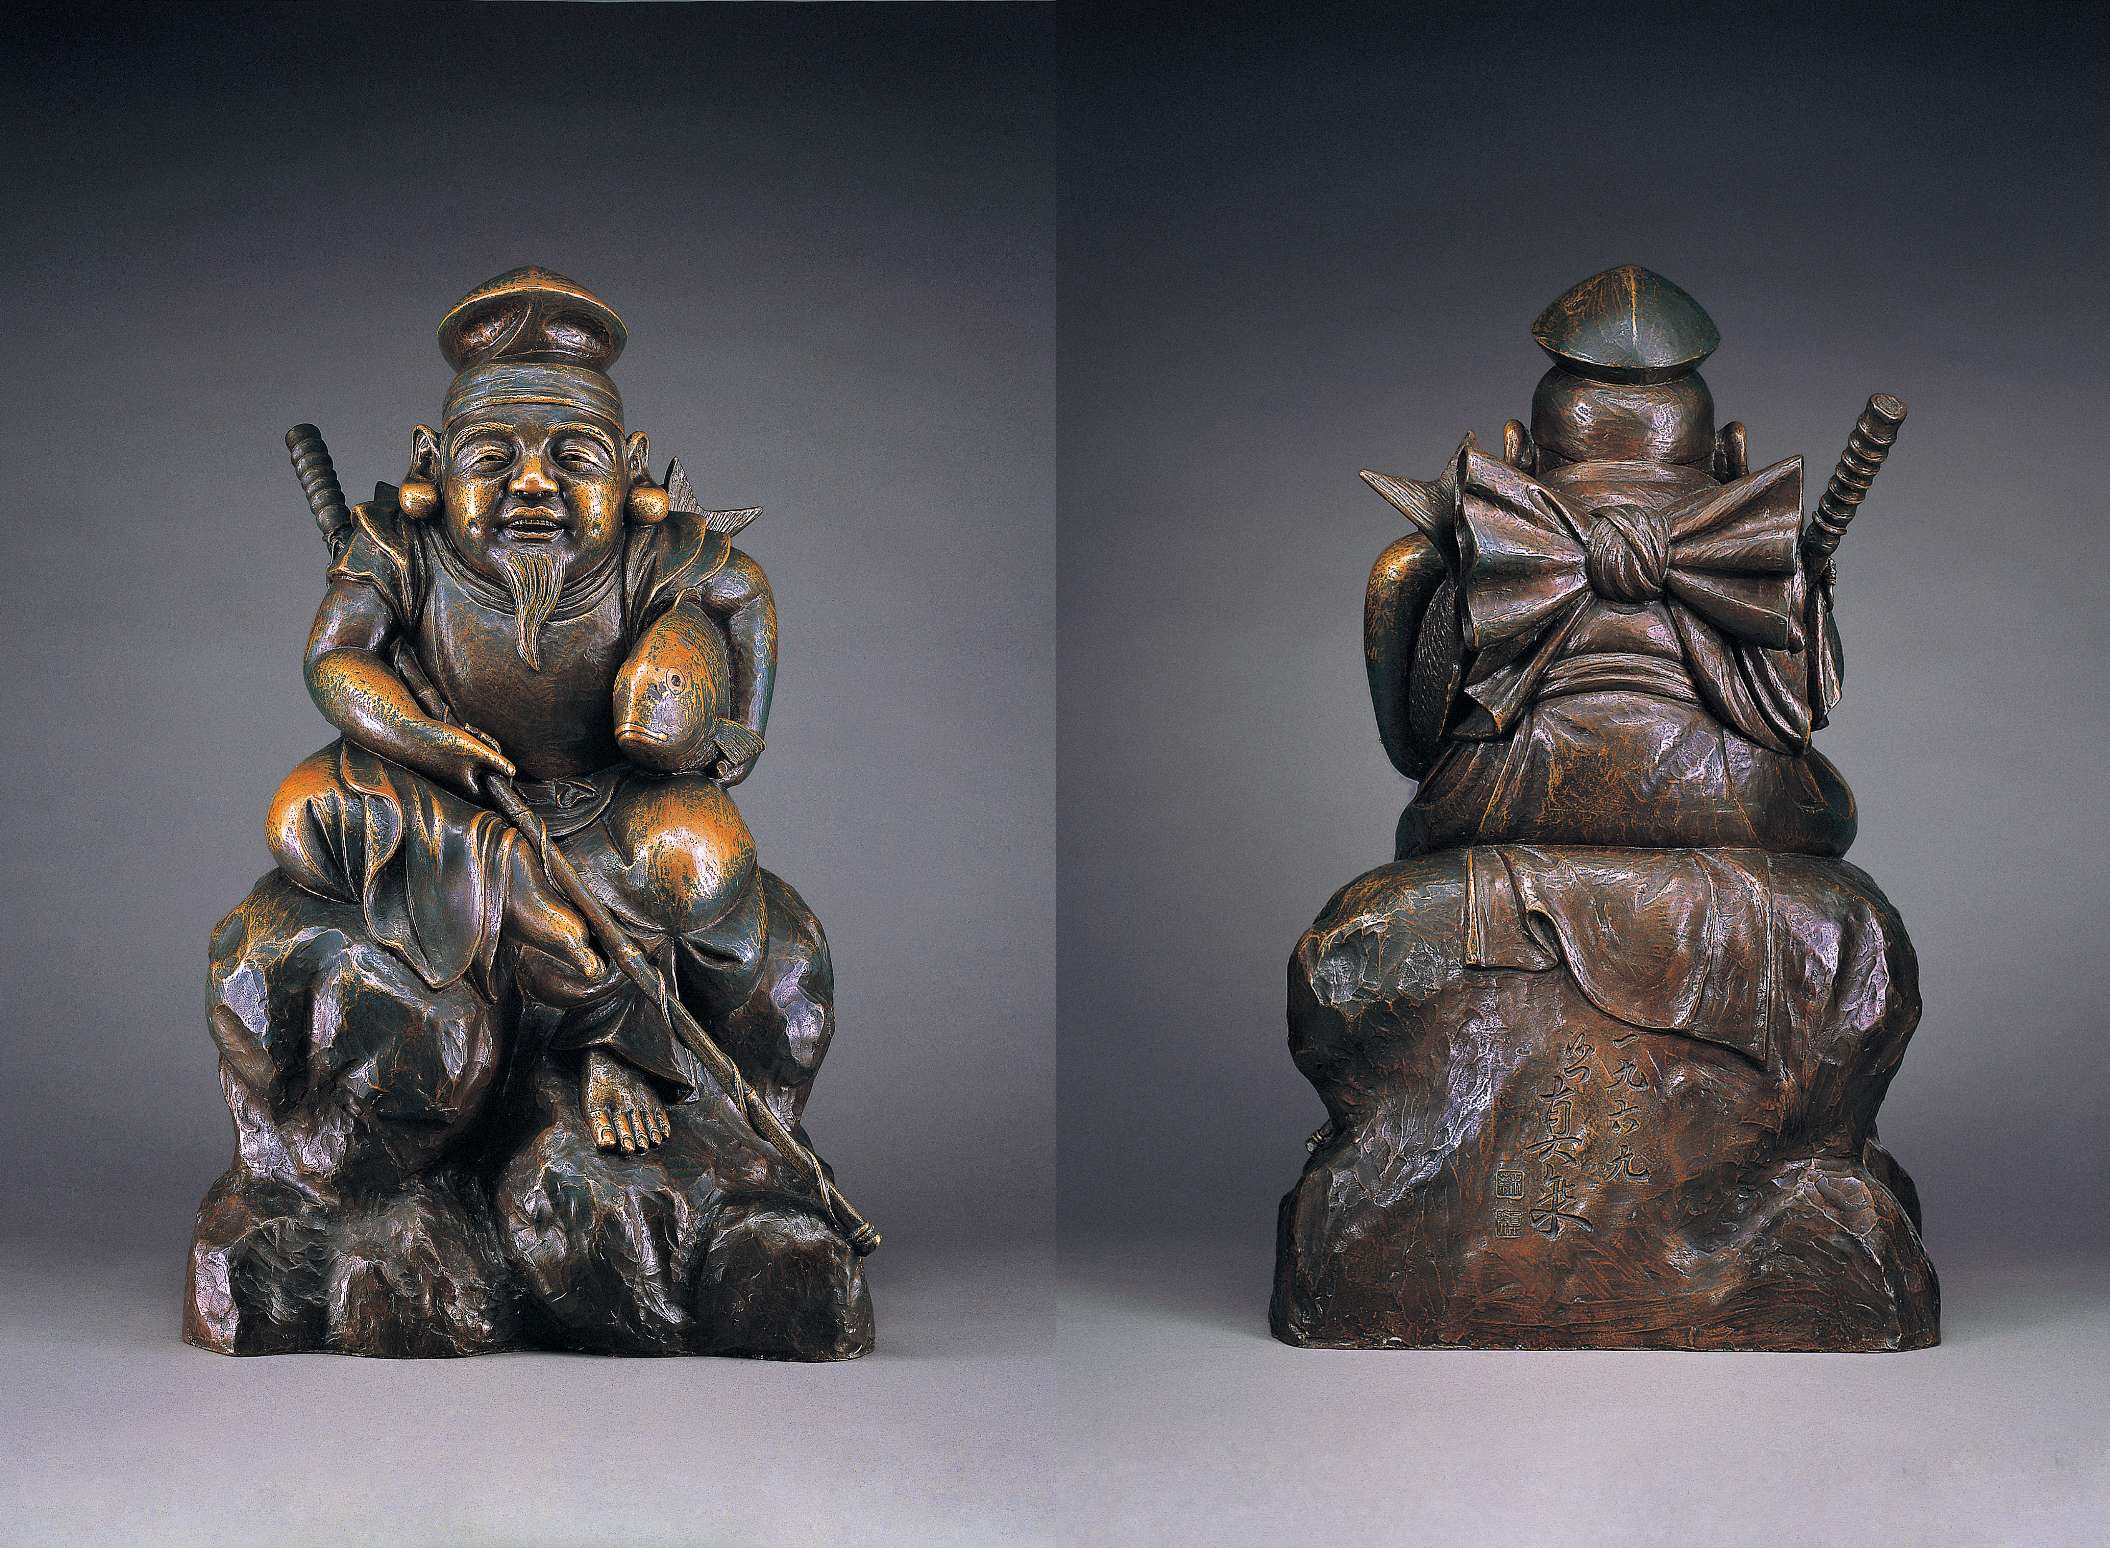 (left) A smiling, stout, bearded man in Chinese tunic and cap sits barefoot, one leg akimbo, atop a large rock, his right hand holding a long spear-like implement, his left hugging a large fish to his body. (right) The back of the statue shows the long sleeves of the man’s tunic tied in a large bow to leave his arms bare; Japanese calligraphy and stamps can be seen etched into a smooth portion of the statue.